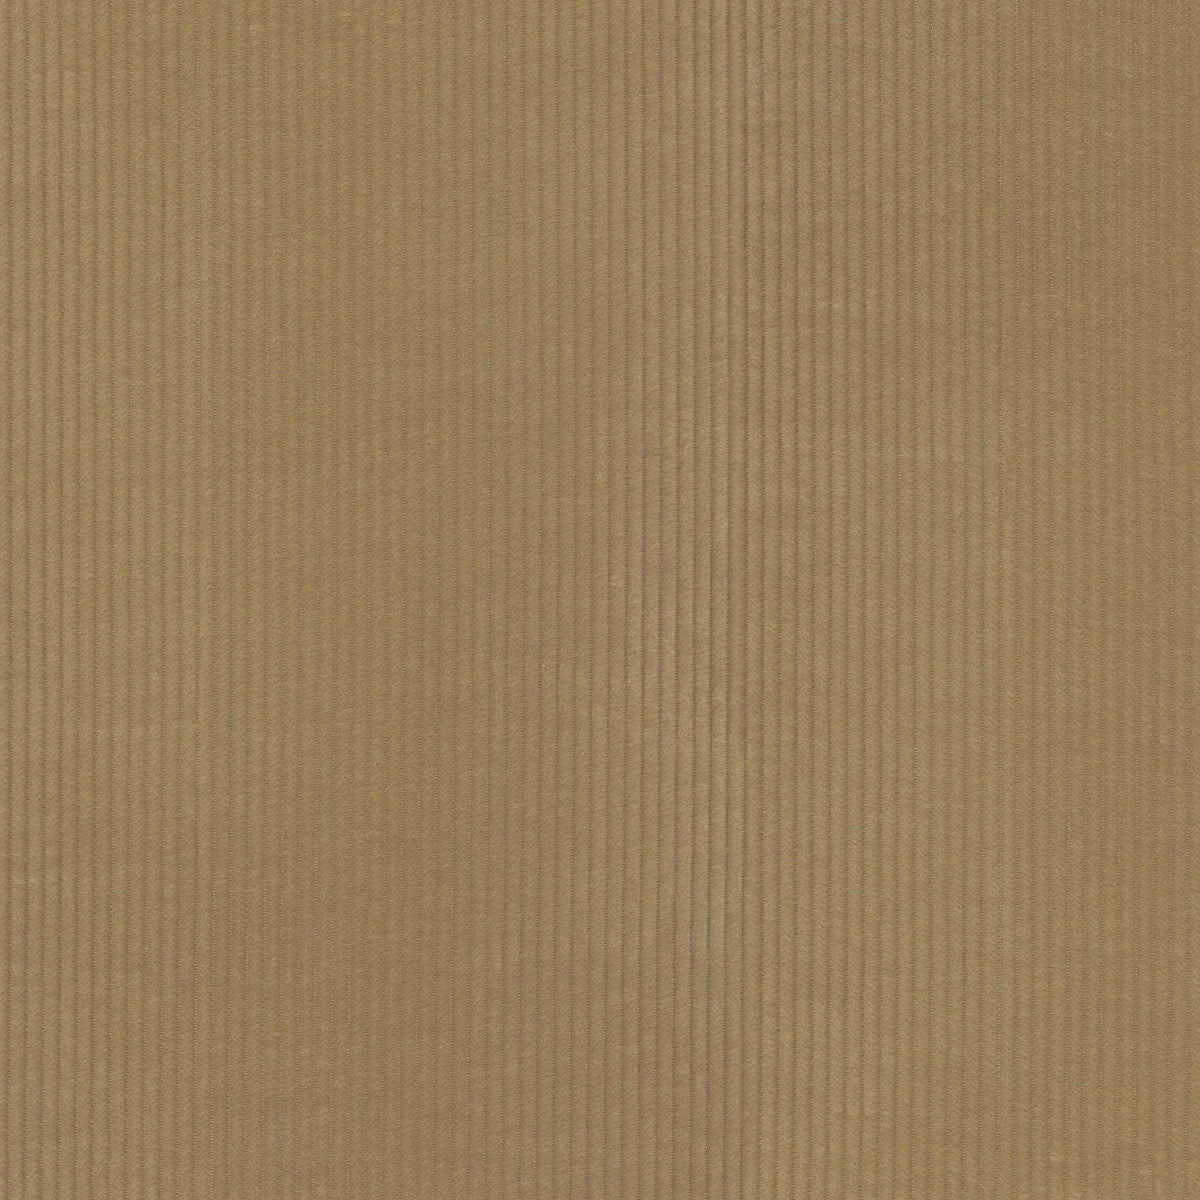 P/K Lifestyles Wales - Camel 412047 Fabric Swatch